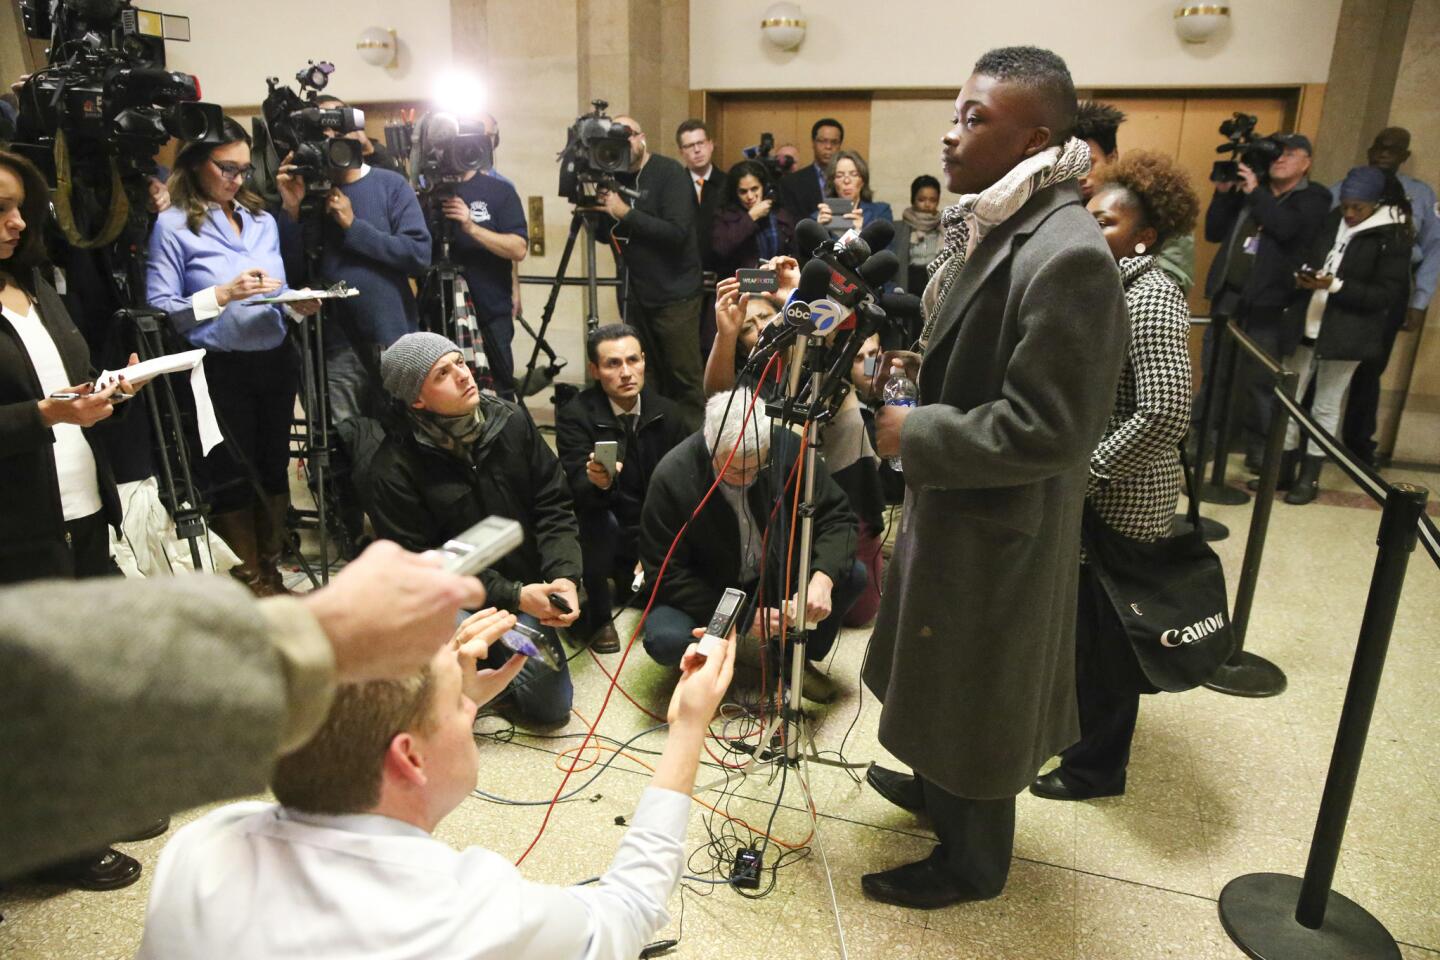 Activist Ja' Mal Green of Skyrocketing Teens Corp. speaks with reporters after a meeting with Mayor Rahm Emanuel at City Hall in Chicago on Nov. 23, 2015.